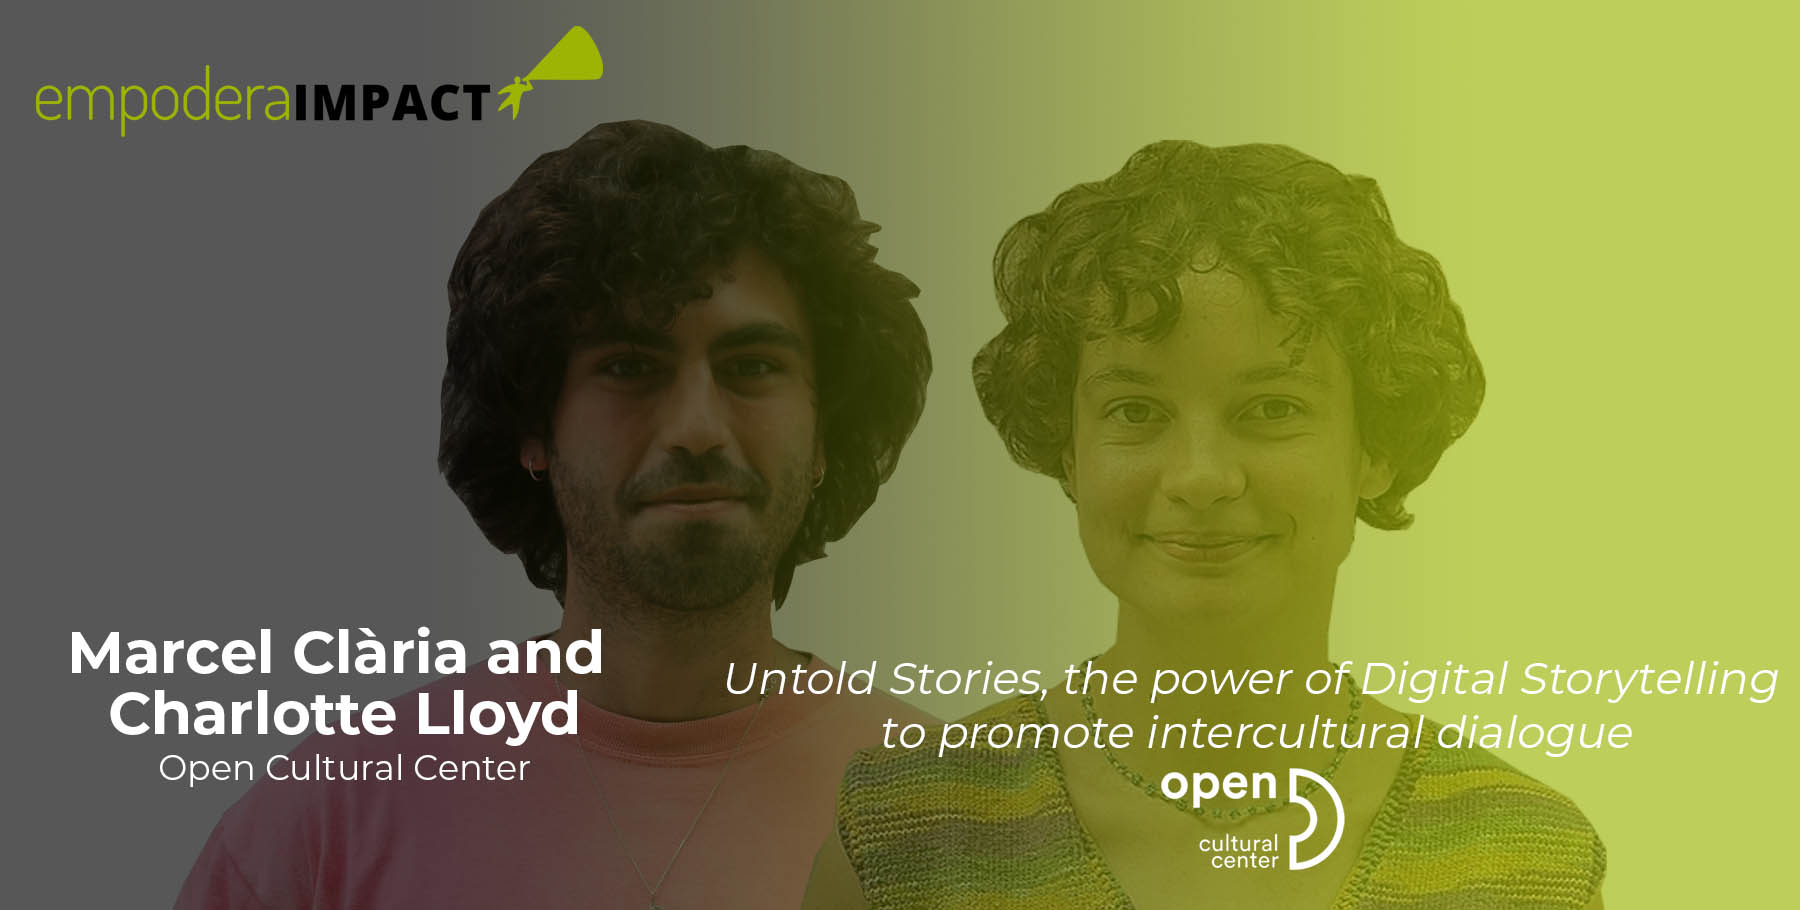 Untold Stories, the power of Digital Storytelling to promote intercultural dialogue